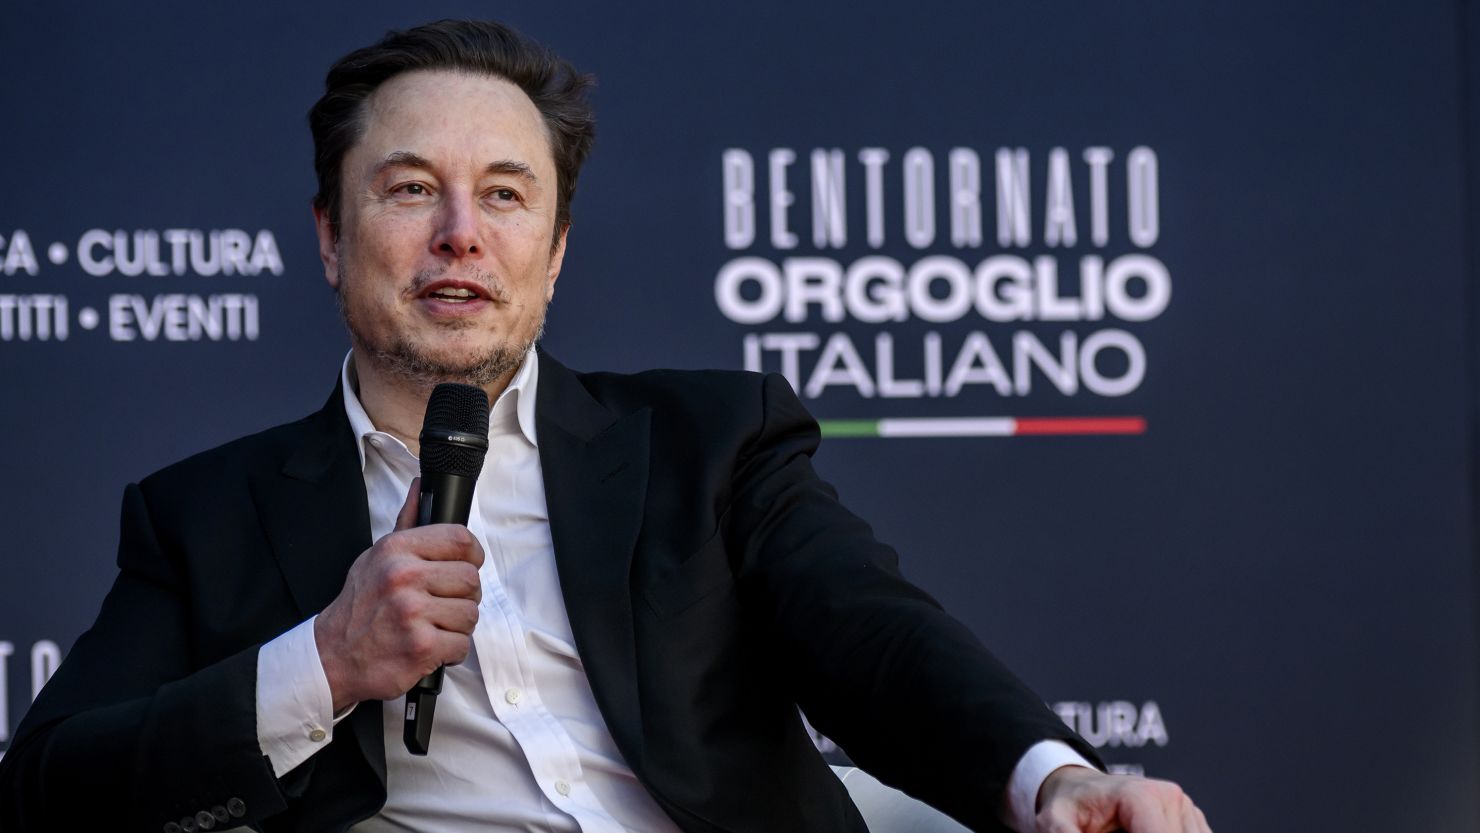 ROME, ITALY - DECEMBER 15: Elon Musk, chief executive officer of Tesla Inc and X (formerly Twitter) Ceo speaks at the Atreju political convention organized by Fratelli d'Italia (Brothers of Italy), on December 15, 2023 in Rome, Italy. Italian Prime Minister Giorgia Meloni's right-wing political party organised a four-day political festival in the Italian capital. (Photo by Antonio Masiello/Getty Images)